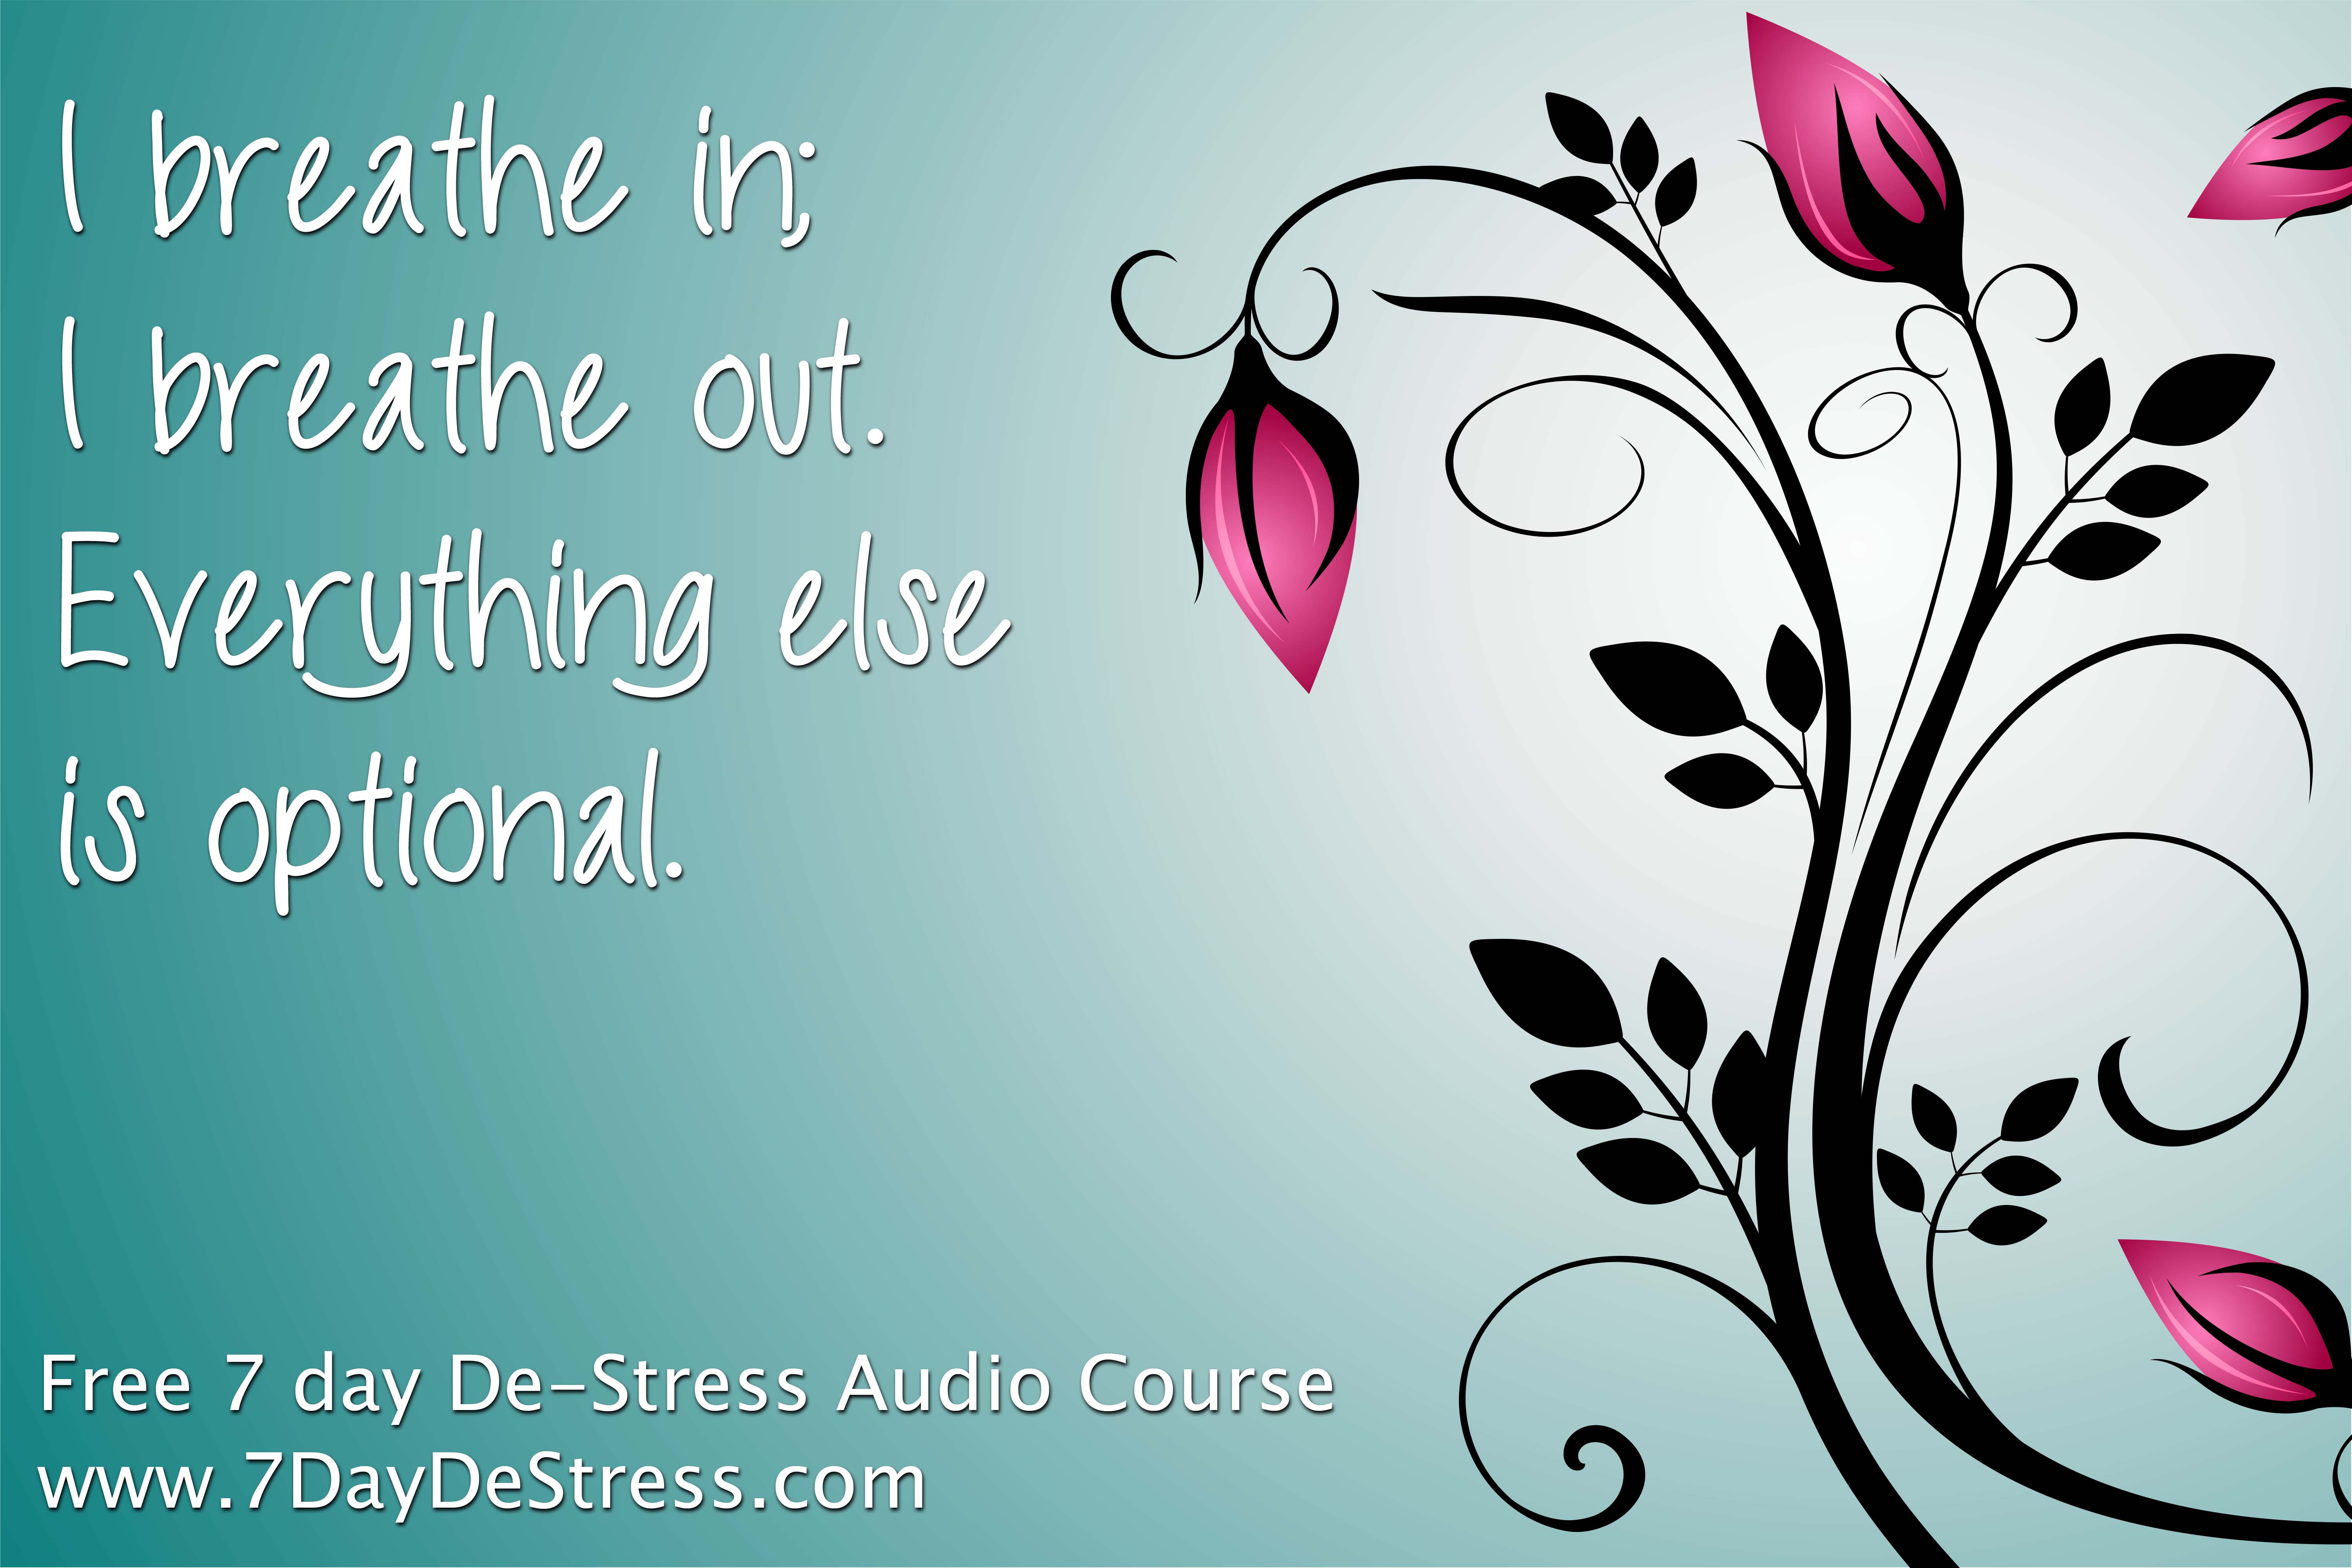 Part Three from 7 Day De-Stress Audio Course